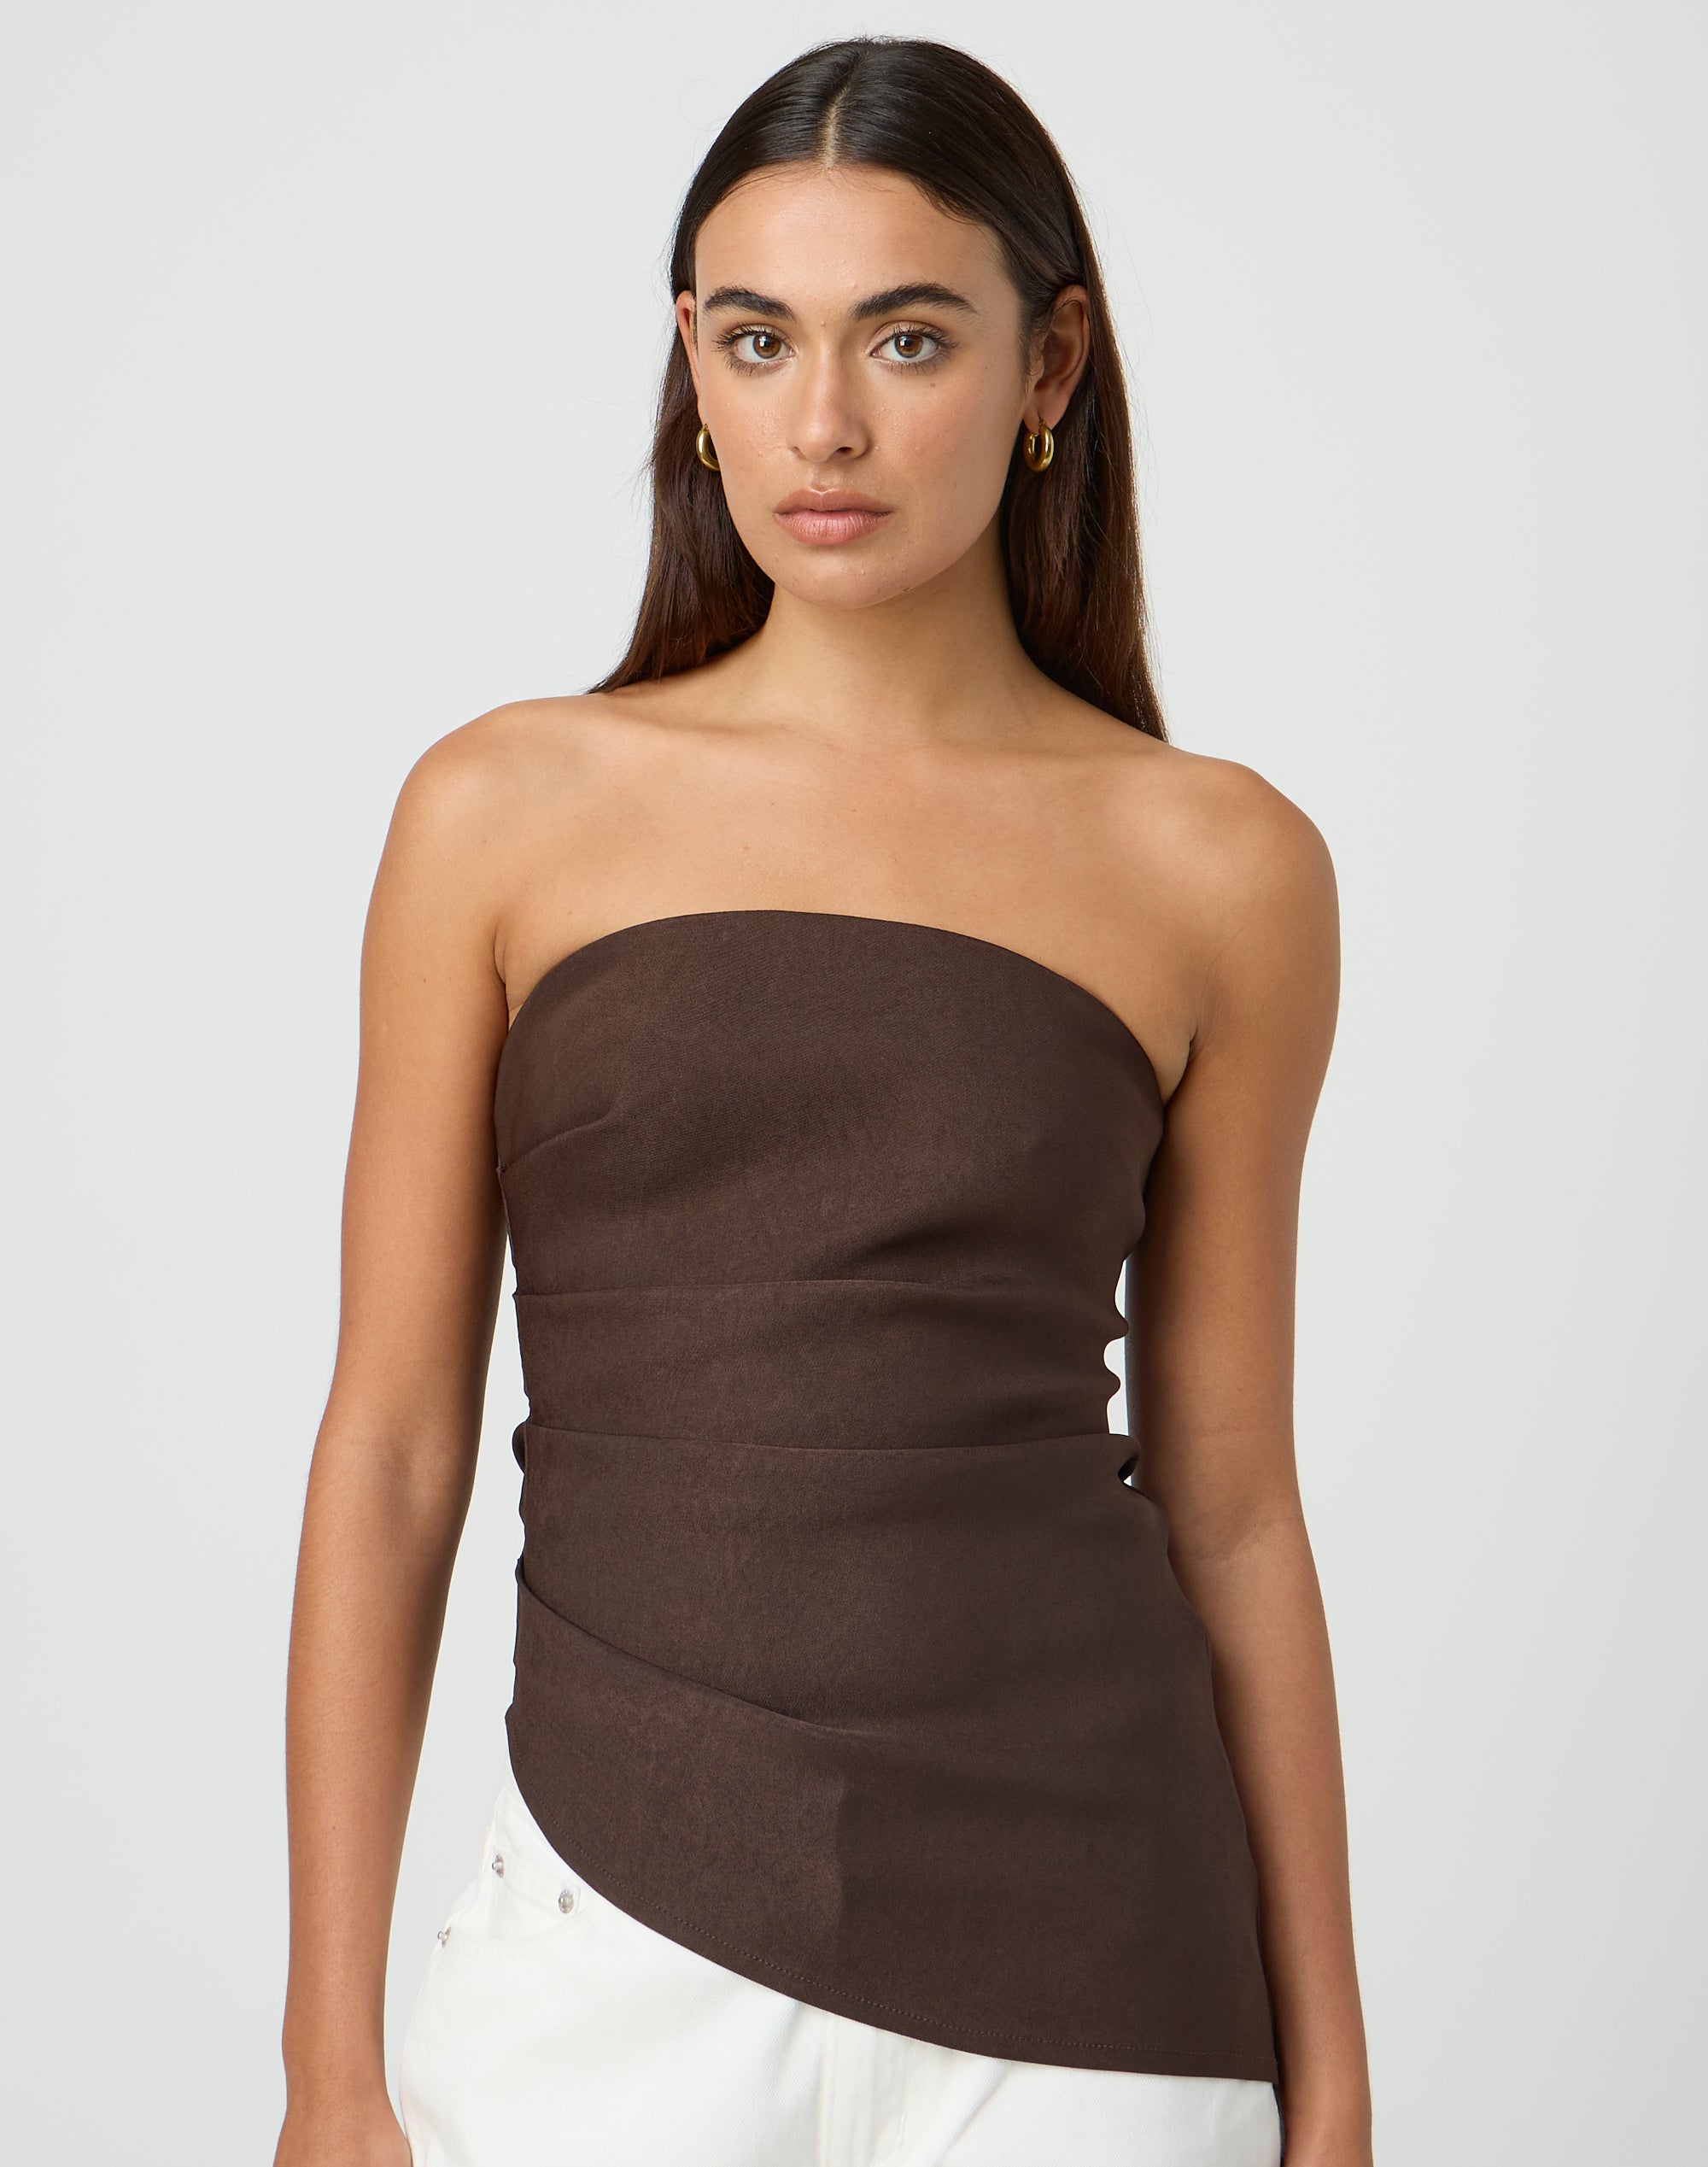 https://www.glassons.com/content/products/gizelle-strapless-soy-bean-front-bv161576pol.jpg